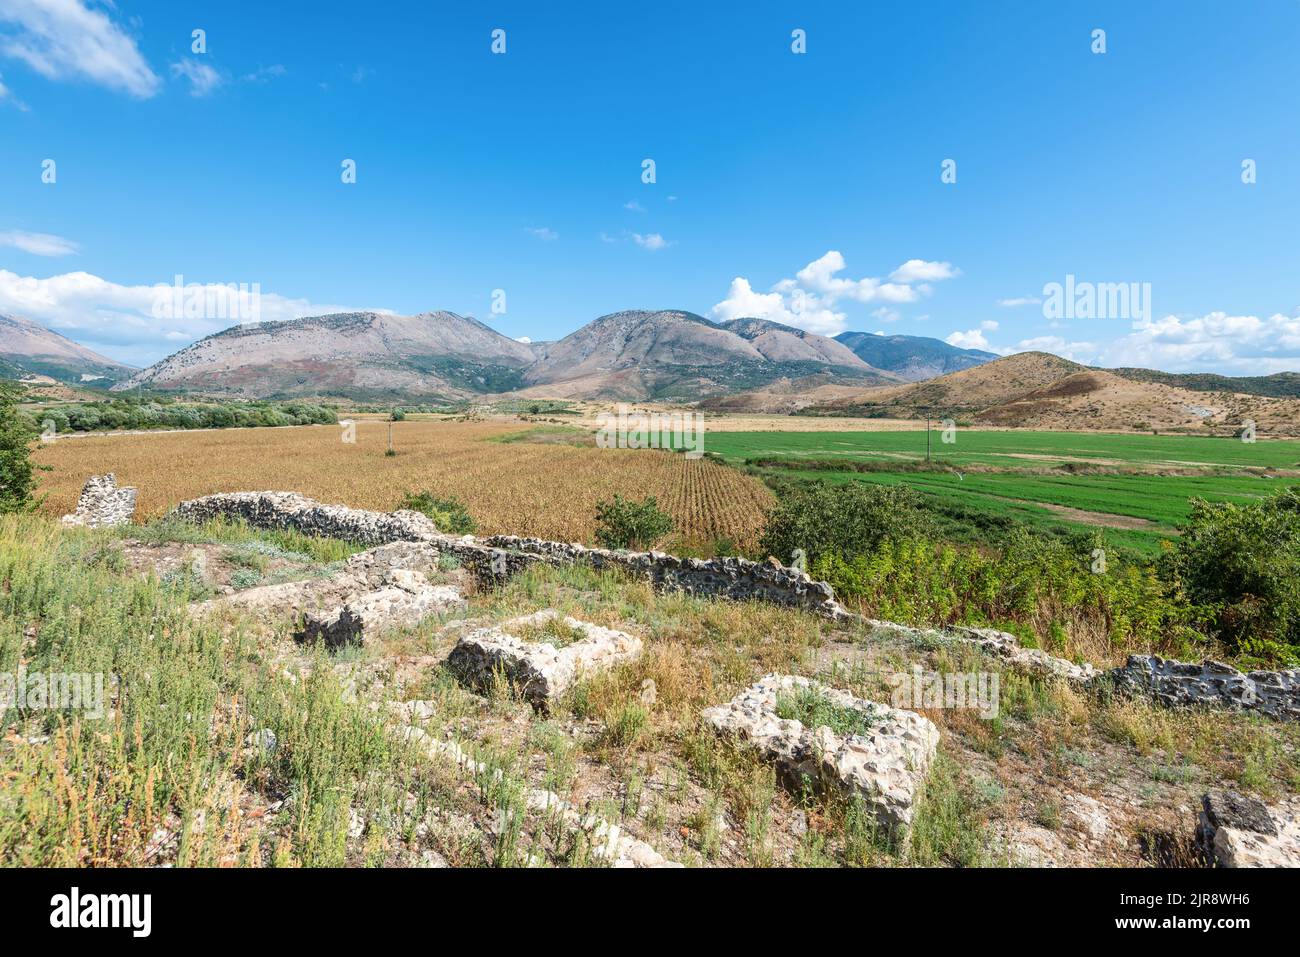 Idyllic landscape with agricultural fields surrounded by mountains in southern Albania near the abandoned Orthodox monastery Stock Photo